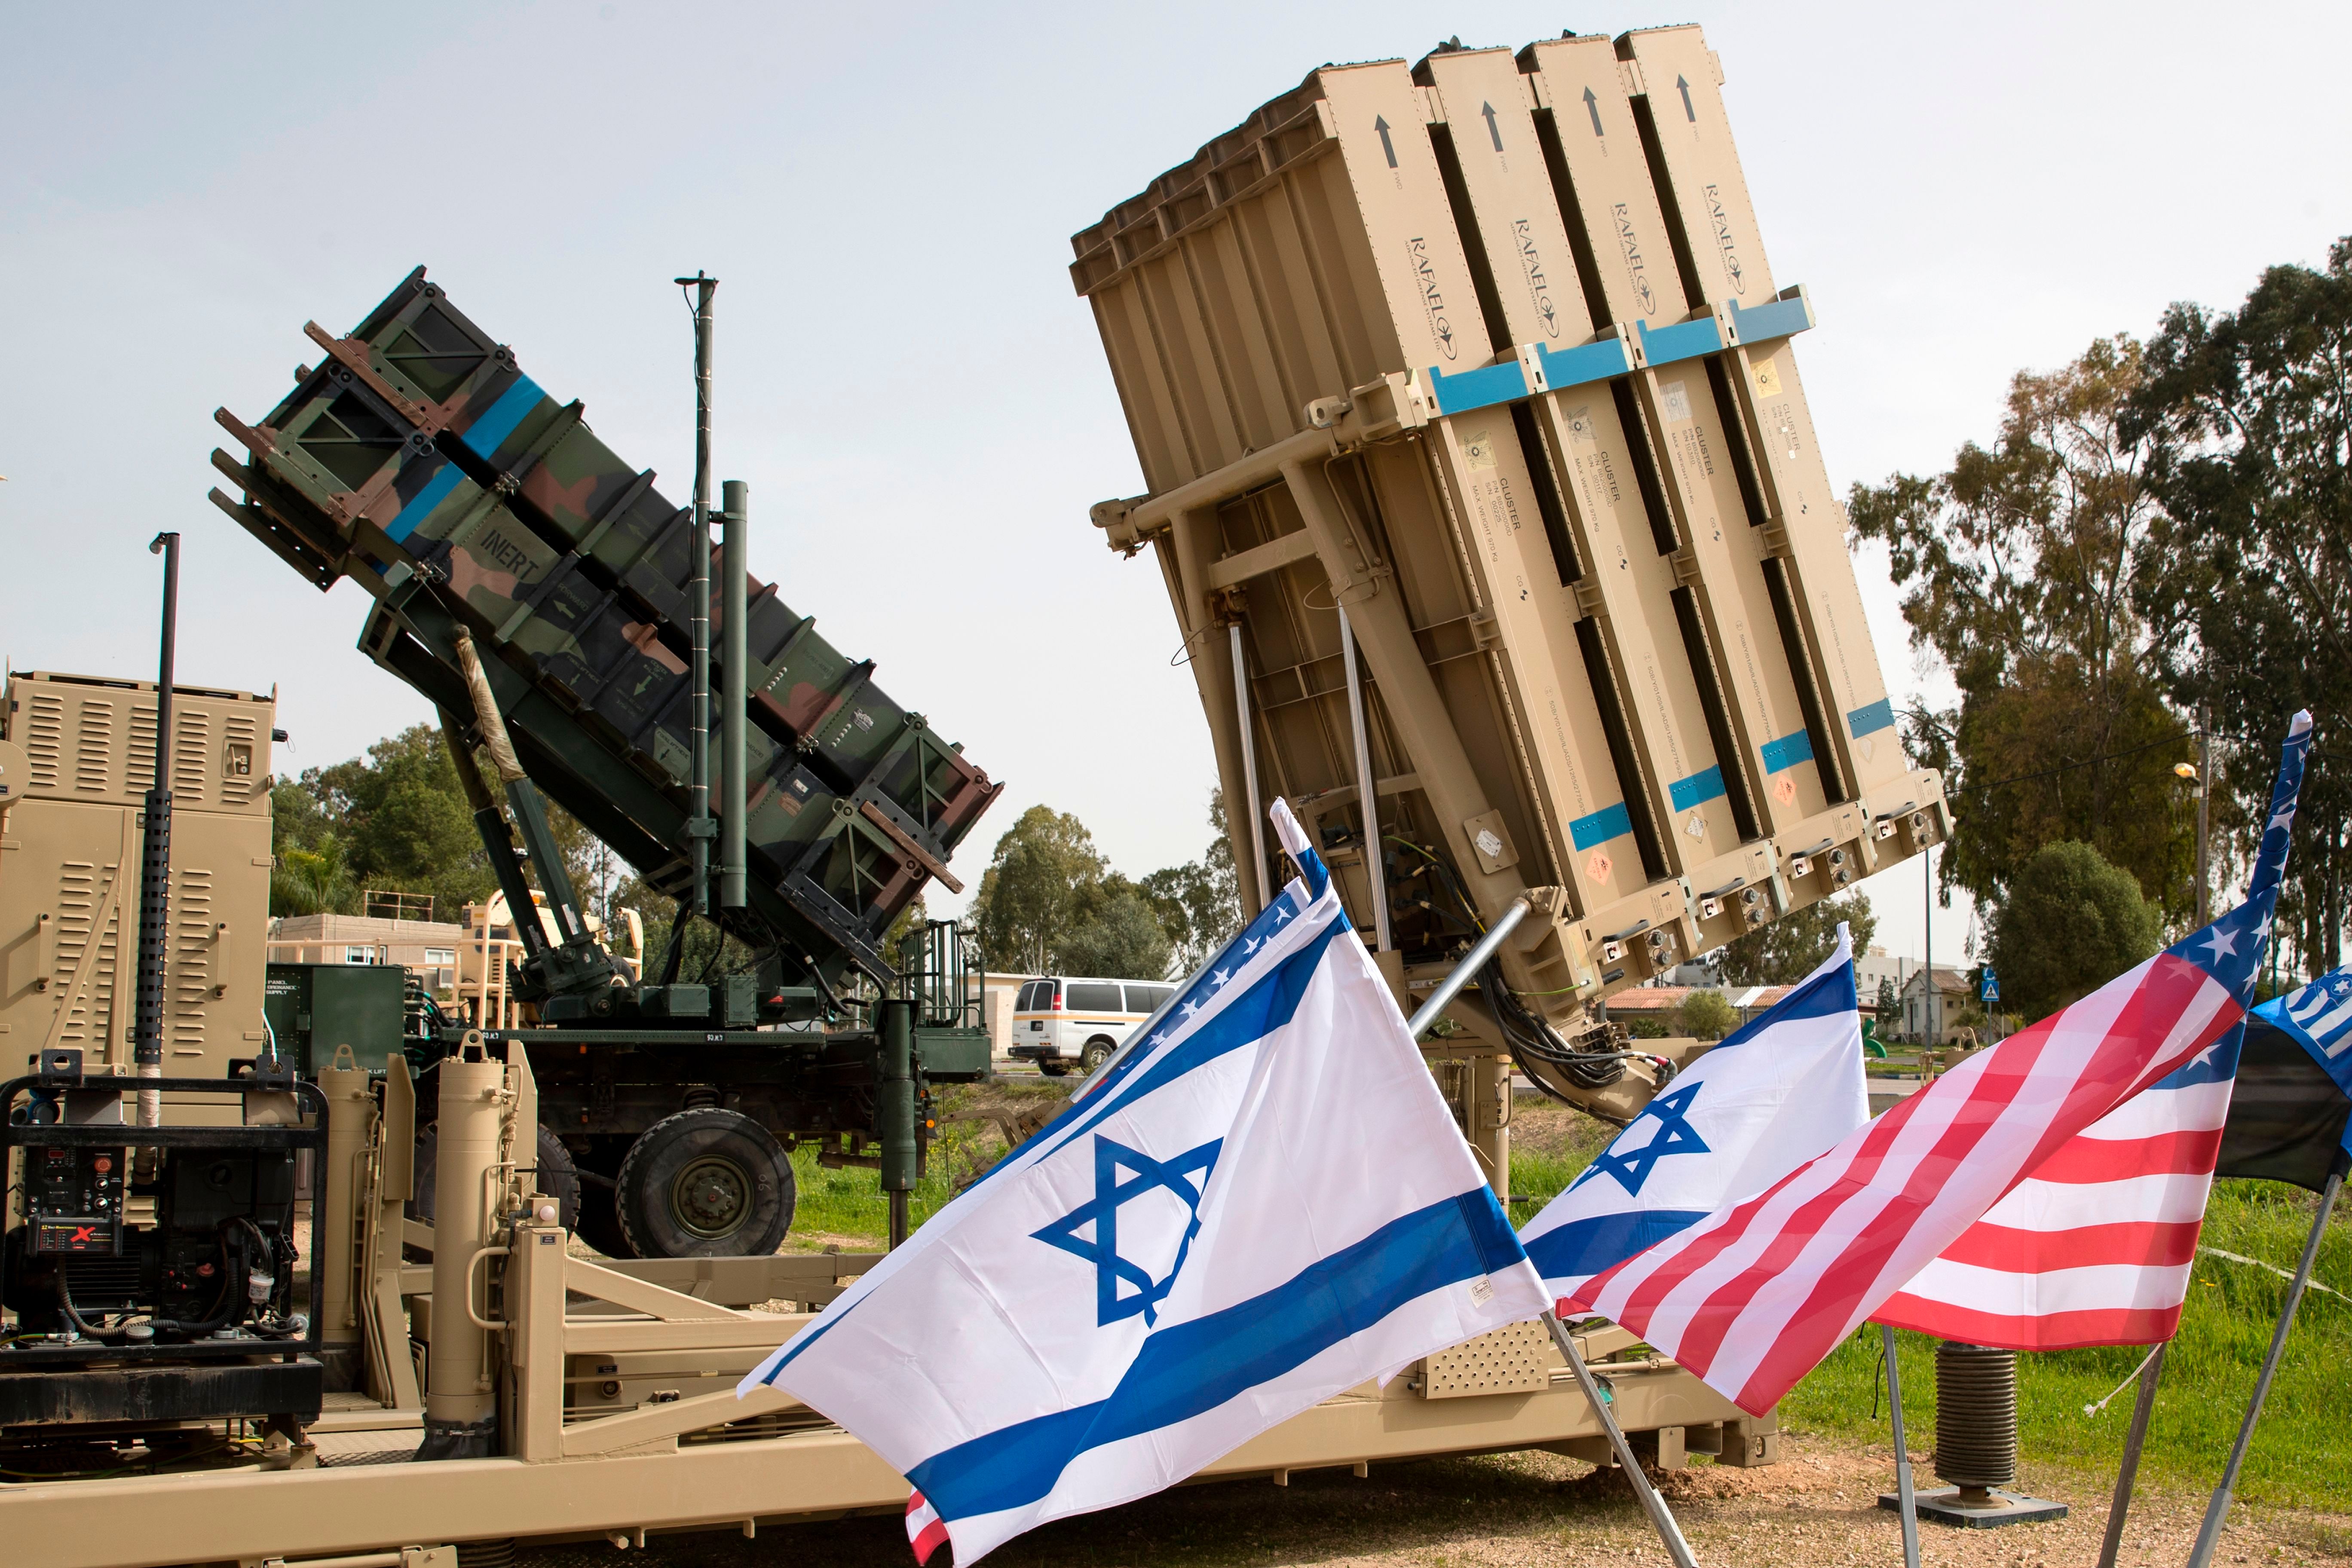 Why Does the U.S. Give So Much Military Aid Money to Israel? - The Atlantic